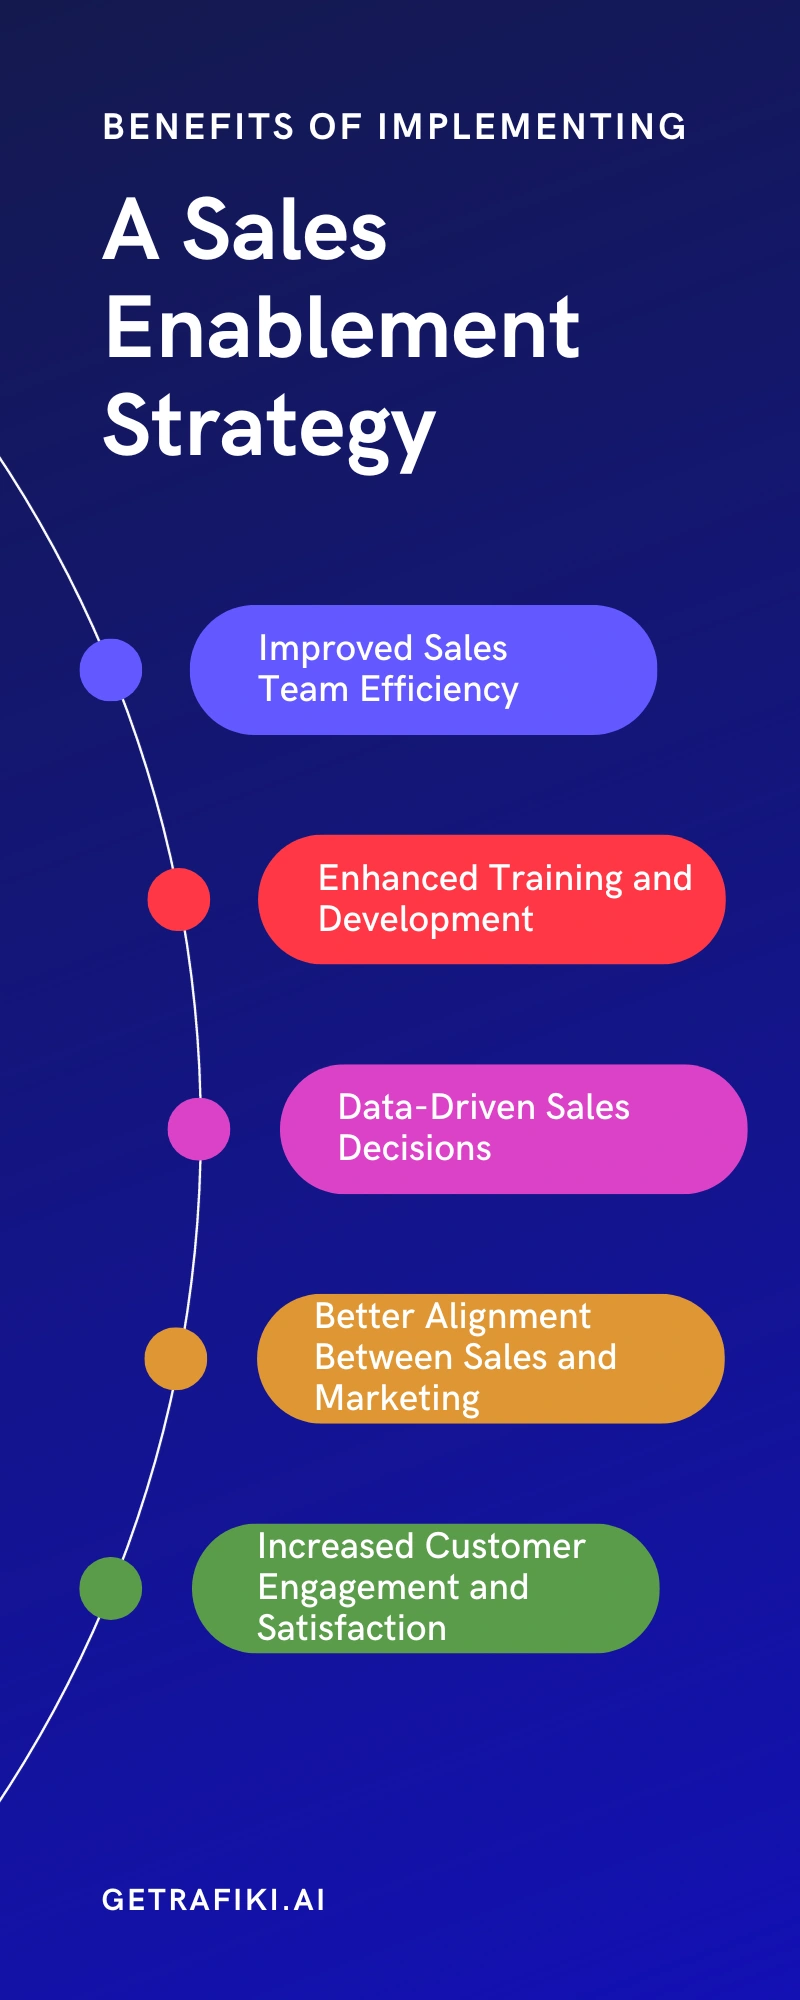 Benefits of a Sales Enablement Strategies